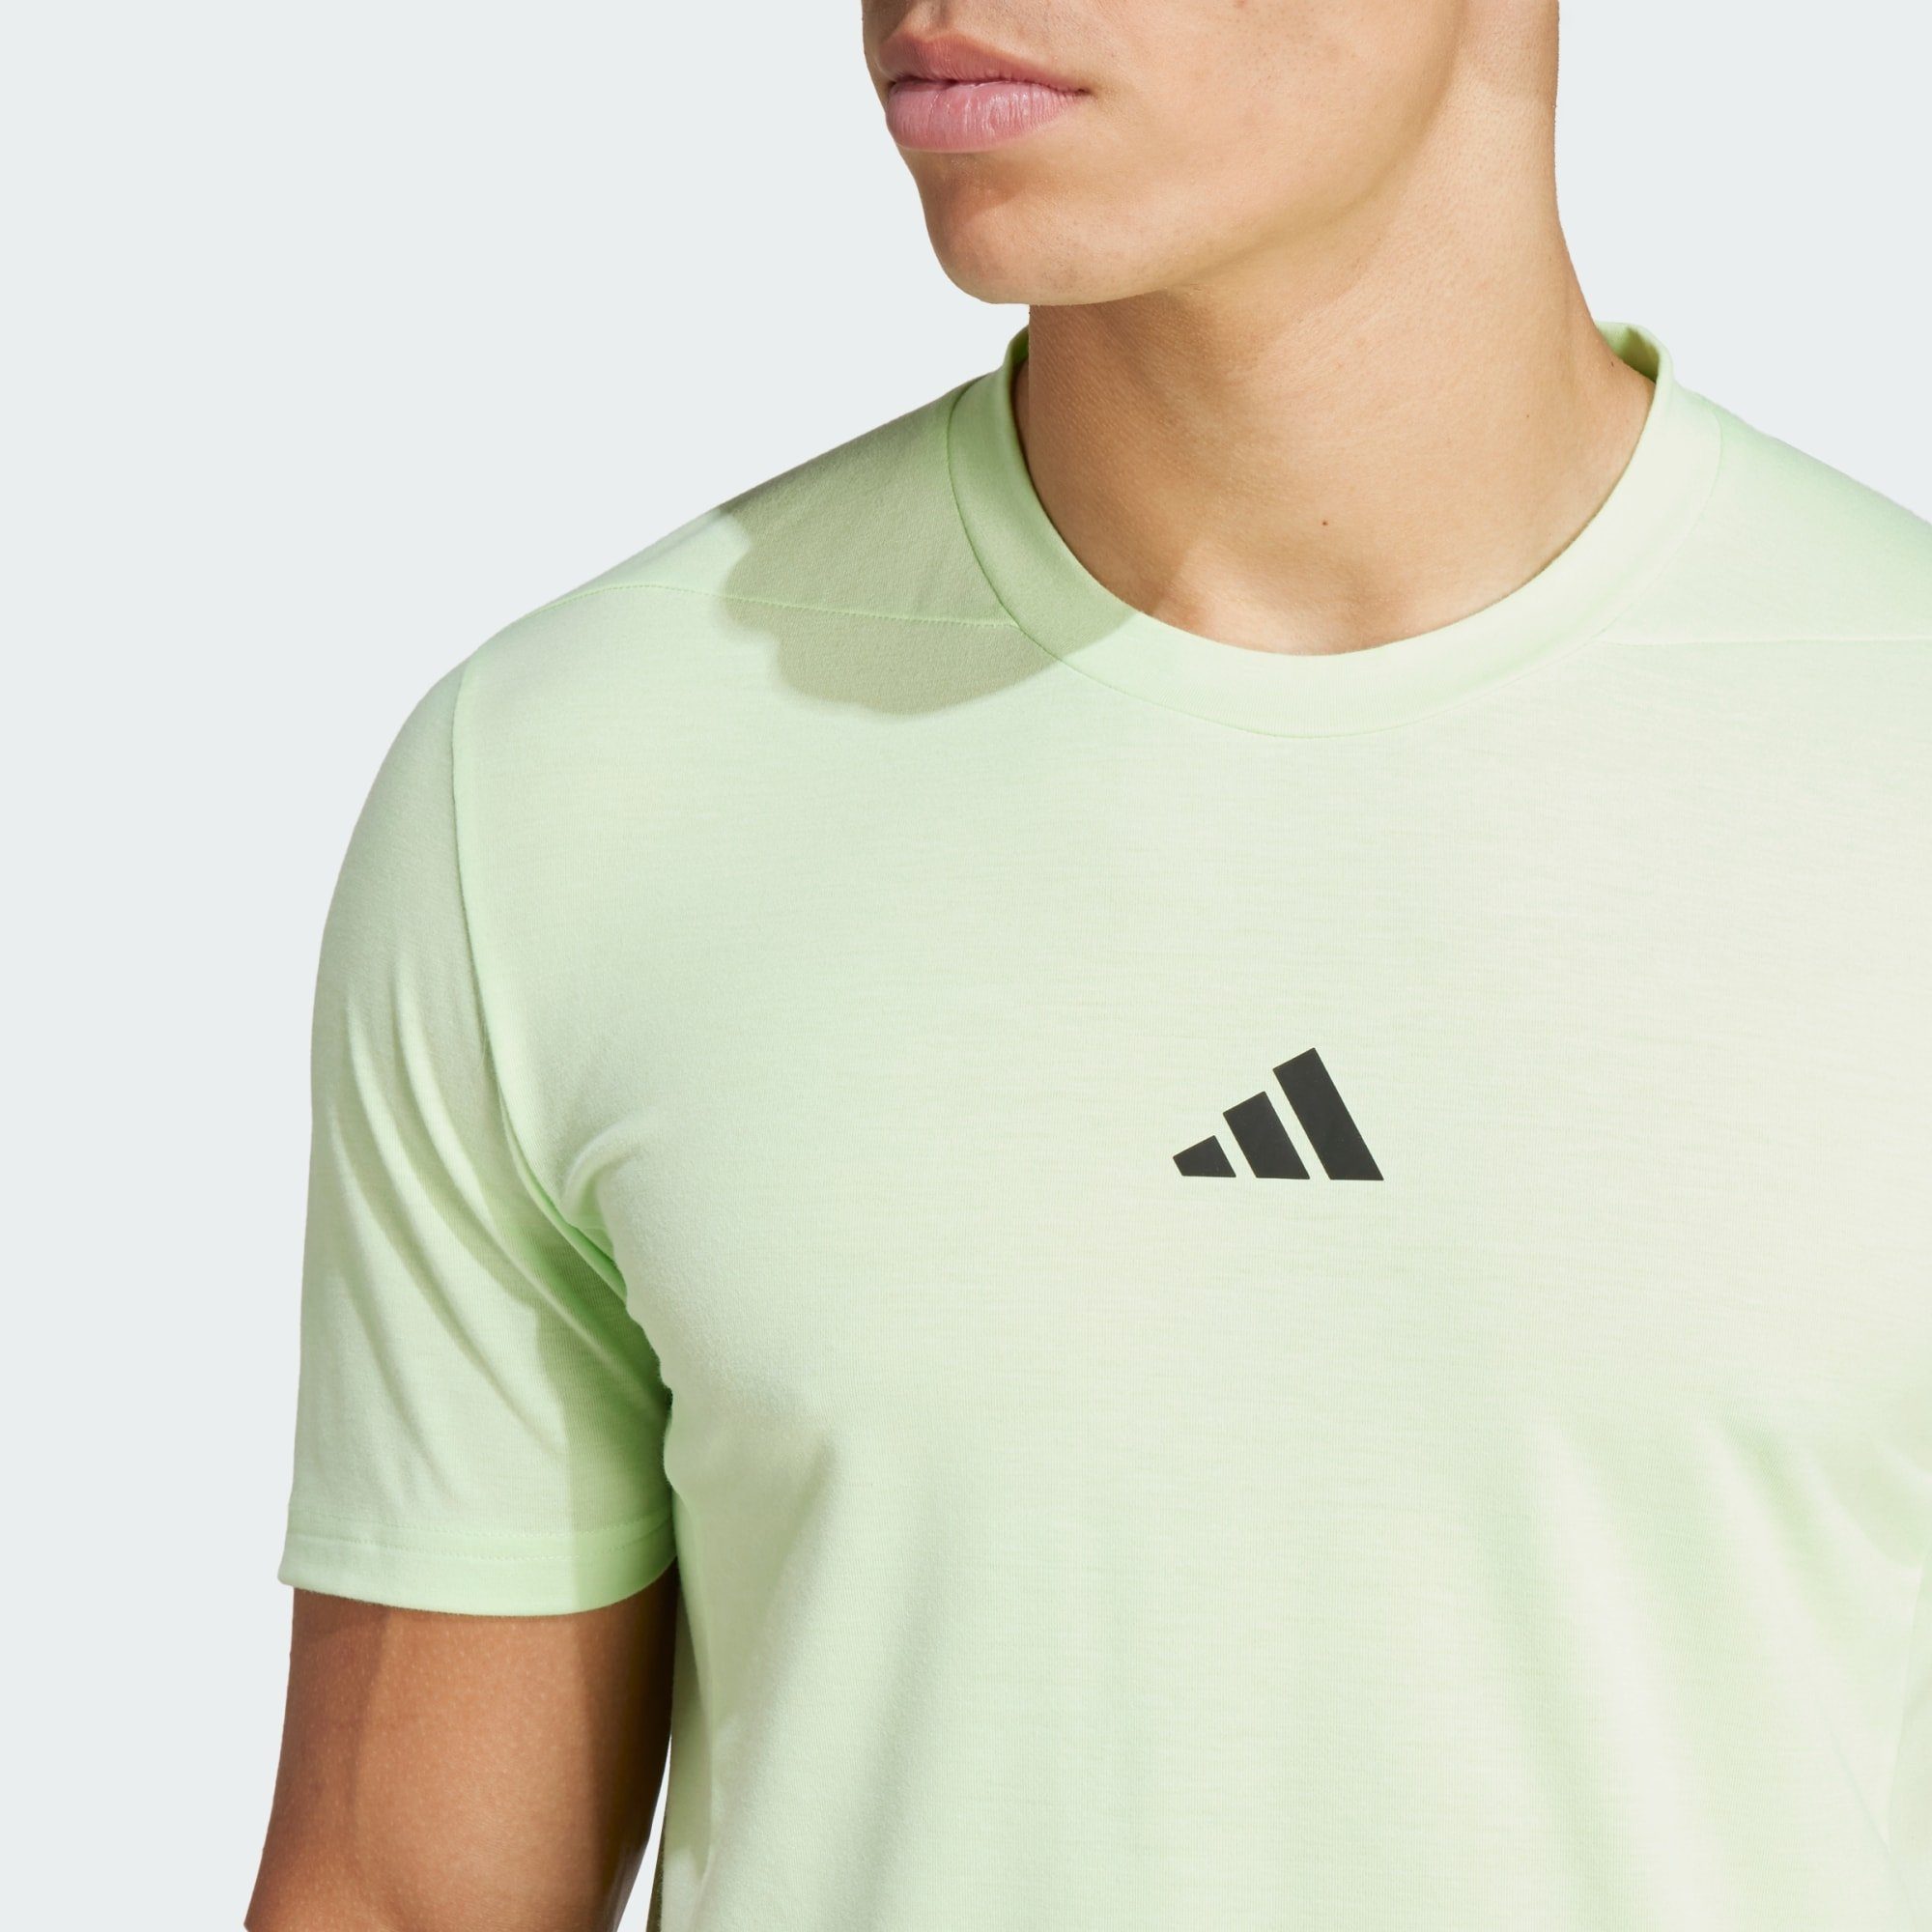 Funktionsshirt Semi DESIGNED WORKOUT FOR Performance T-SHIRT Spark adidas Green TRAINING